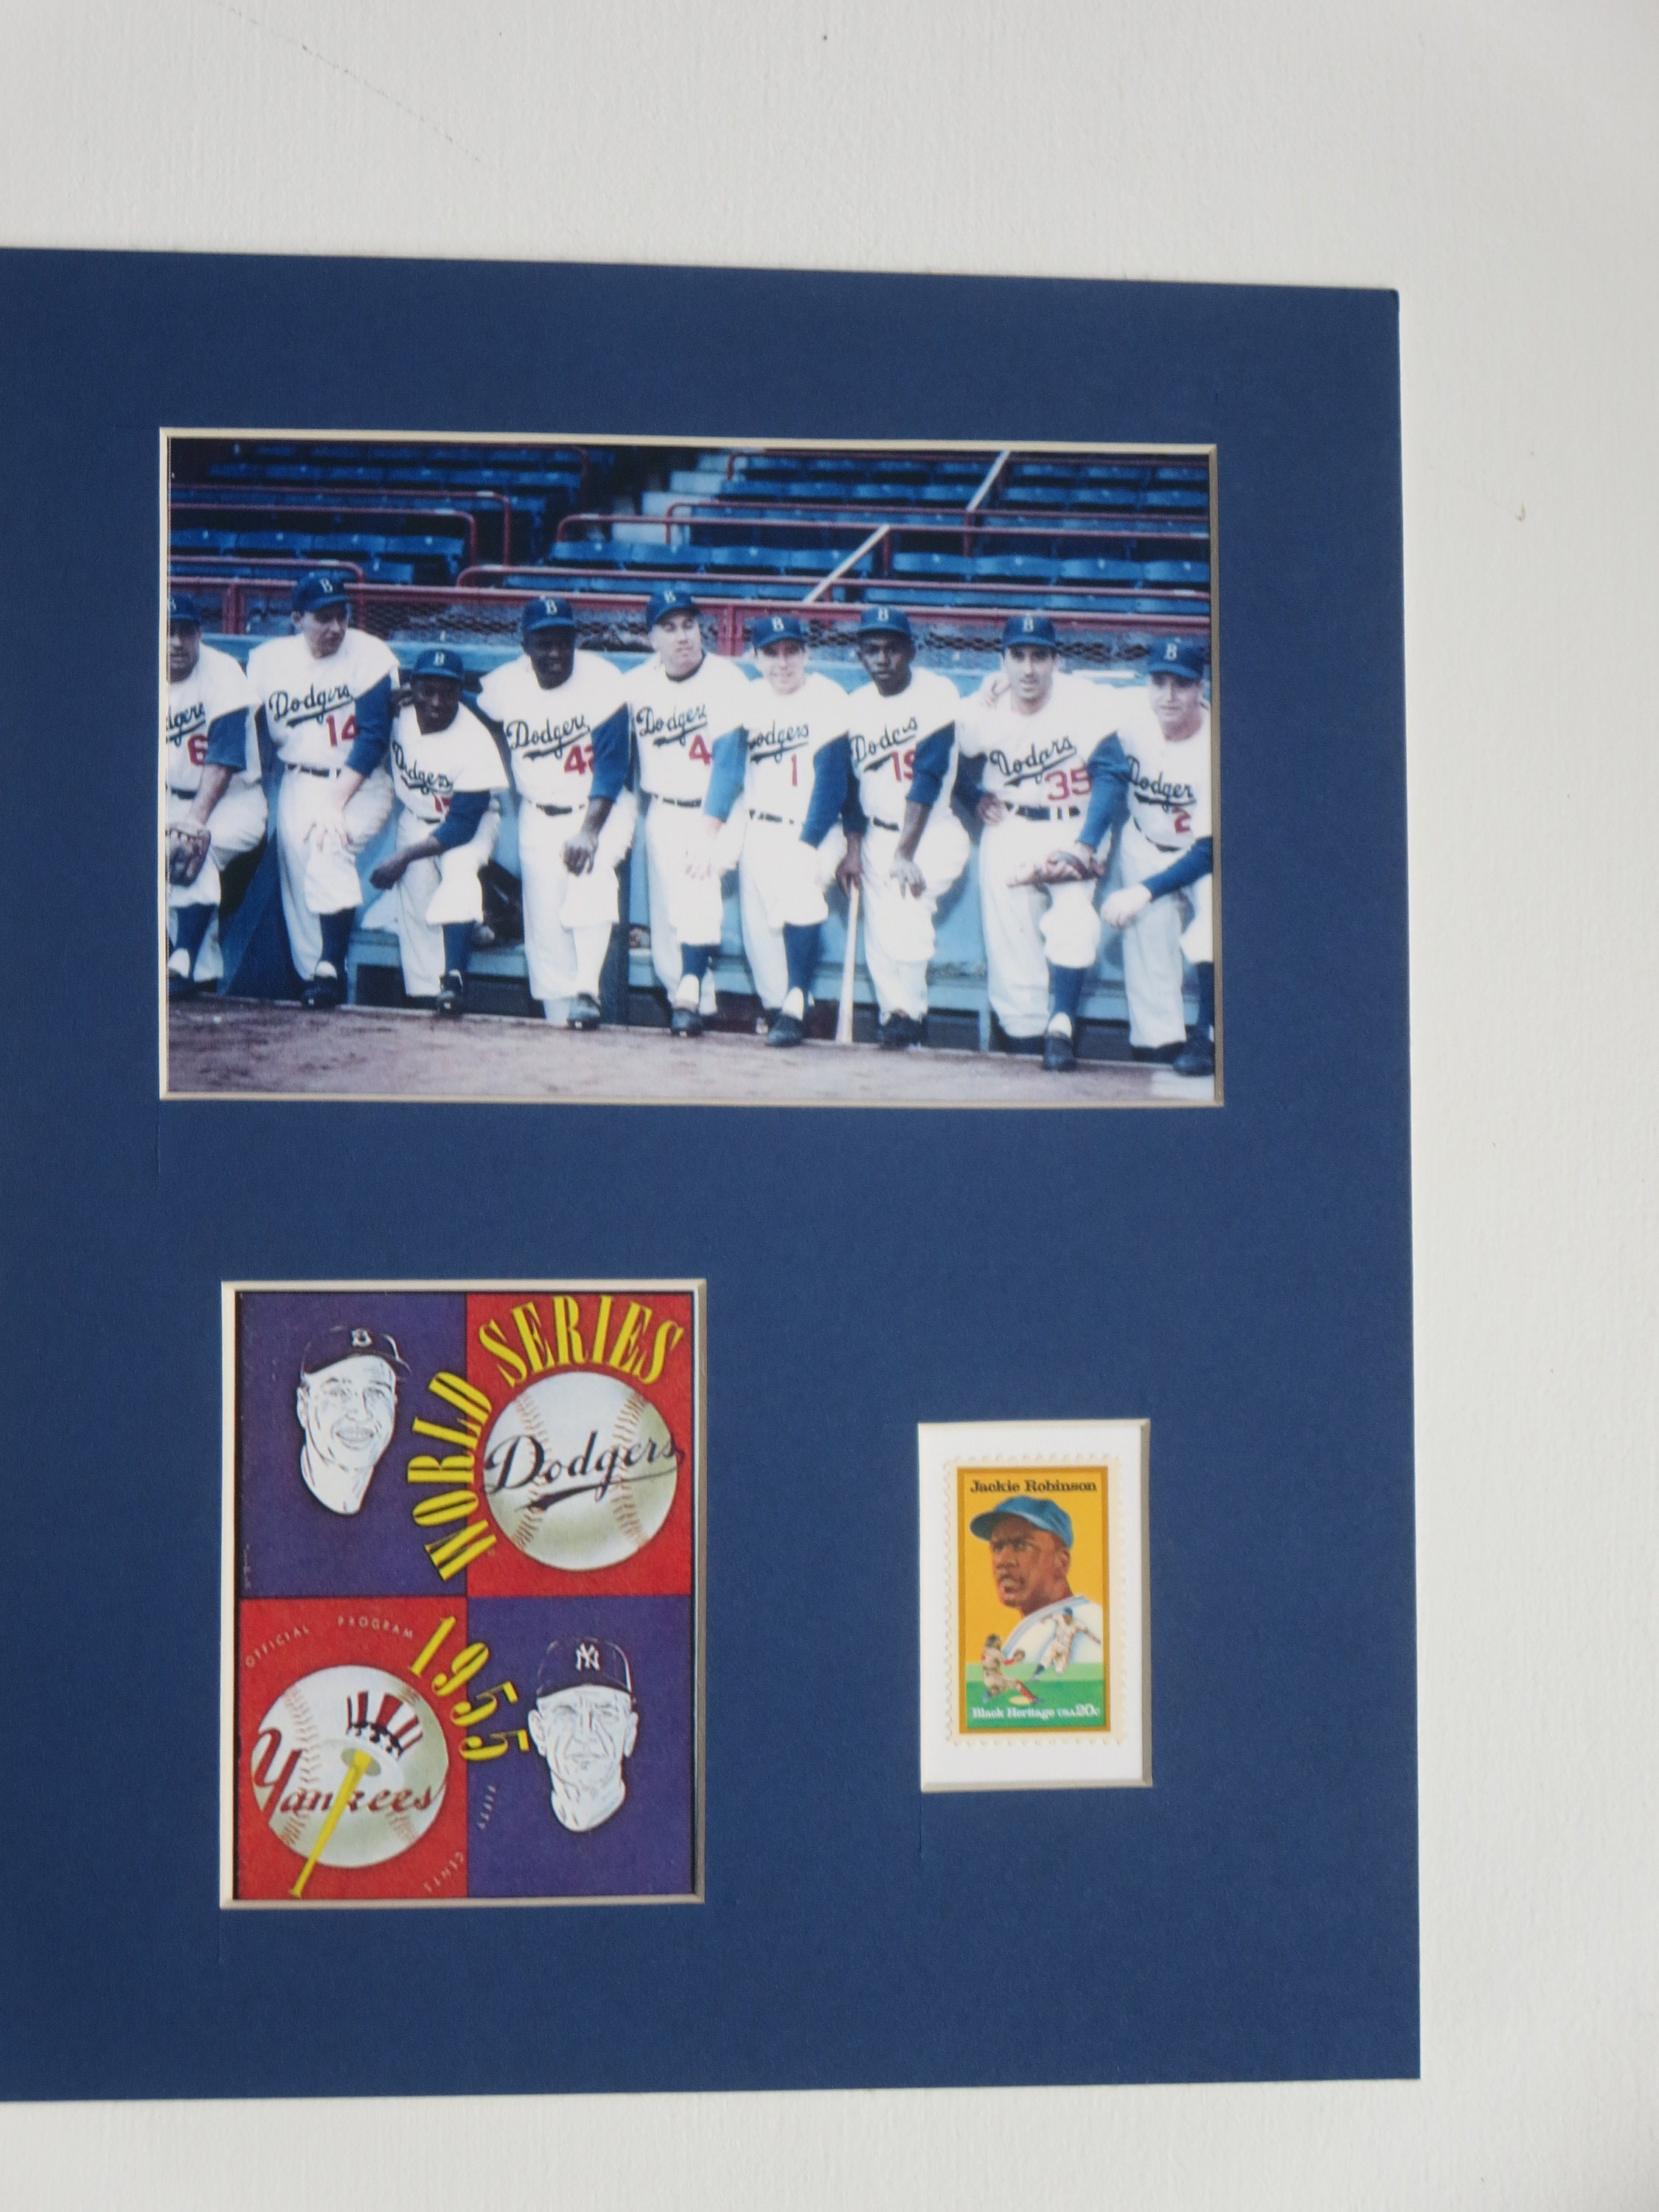 Dodgers Win the 1955 World Series led by Jackie Robinson, Duke Snider and  Pee Wee Reese and the stamp issued to honor Jackie Robinson